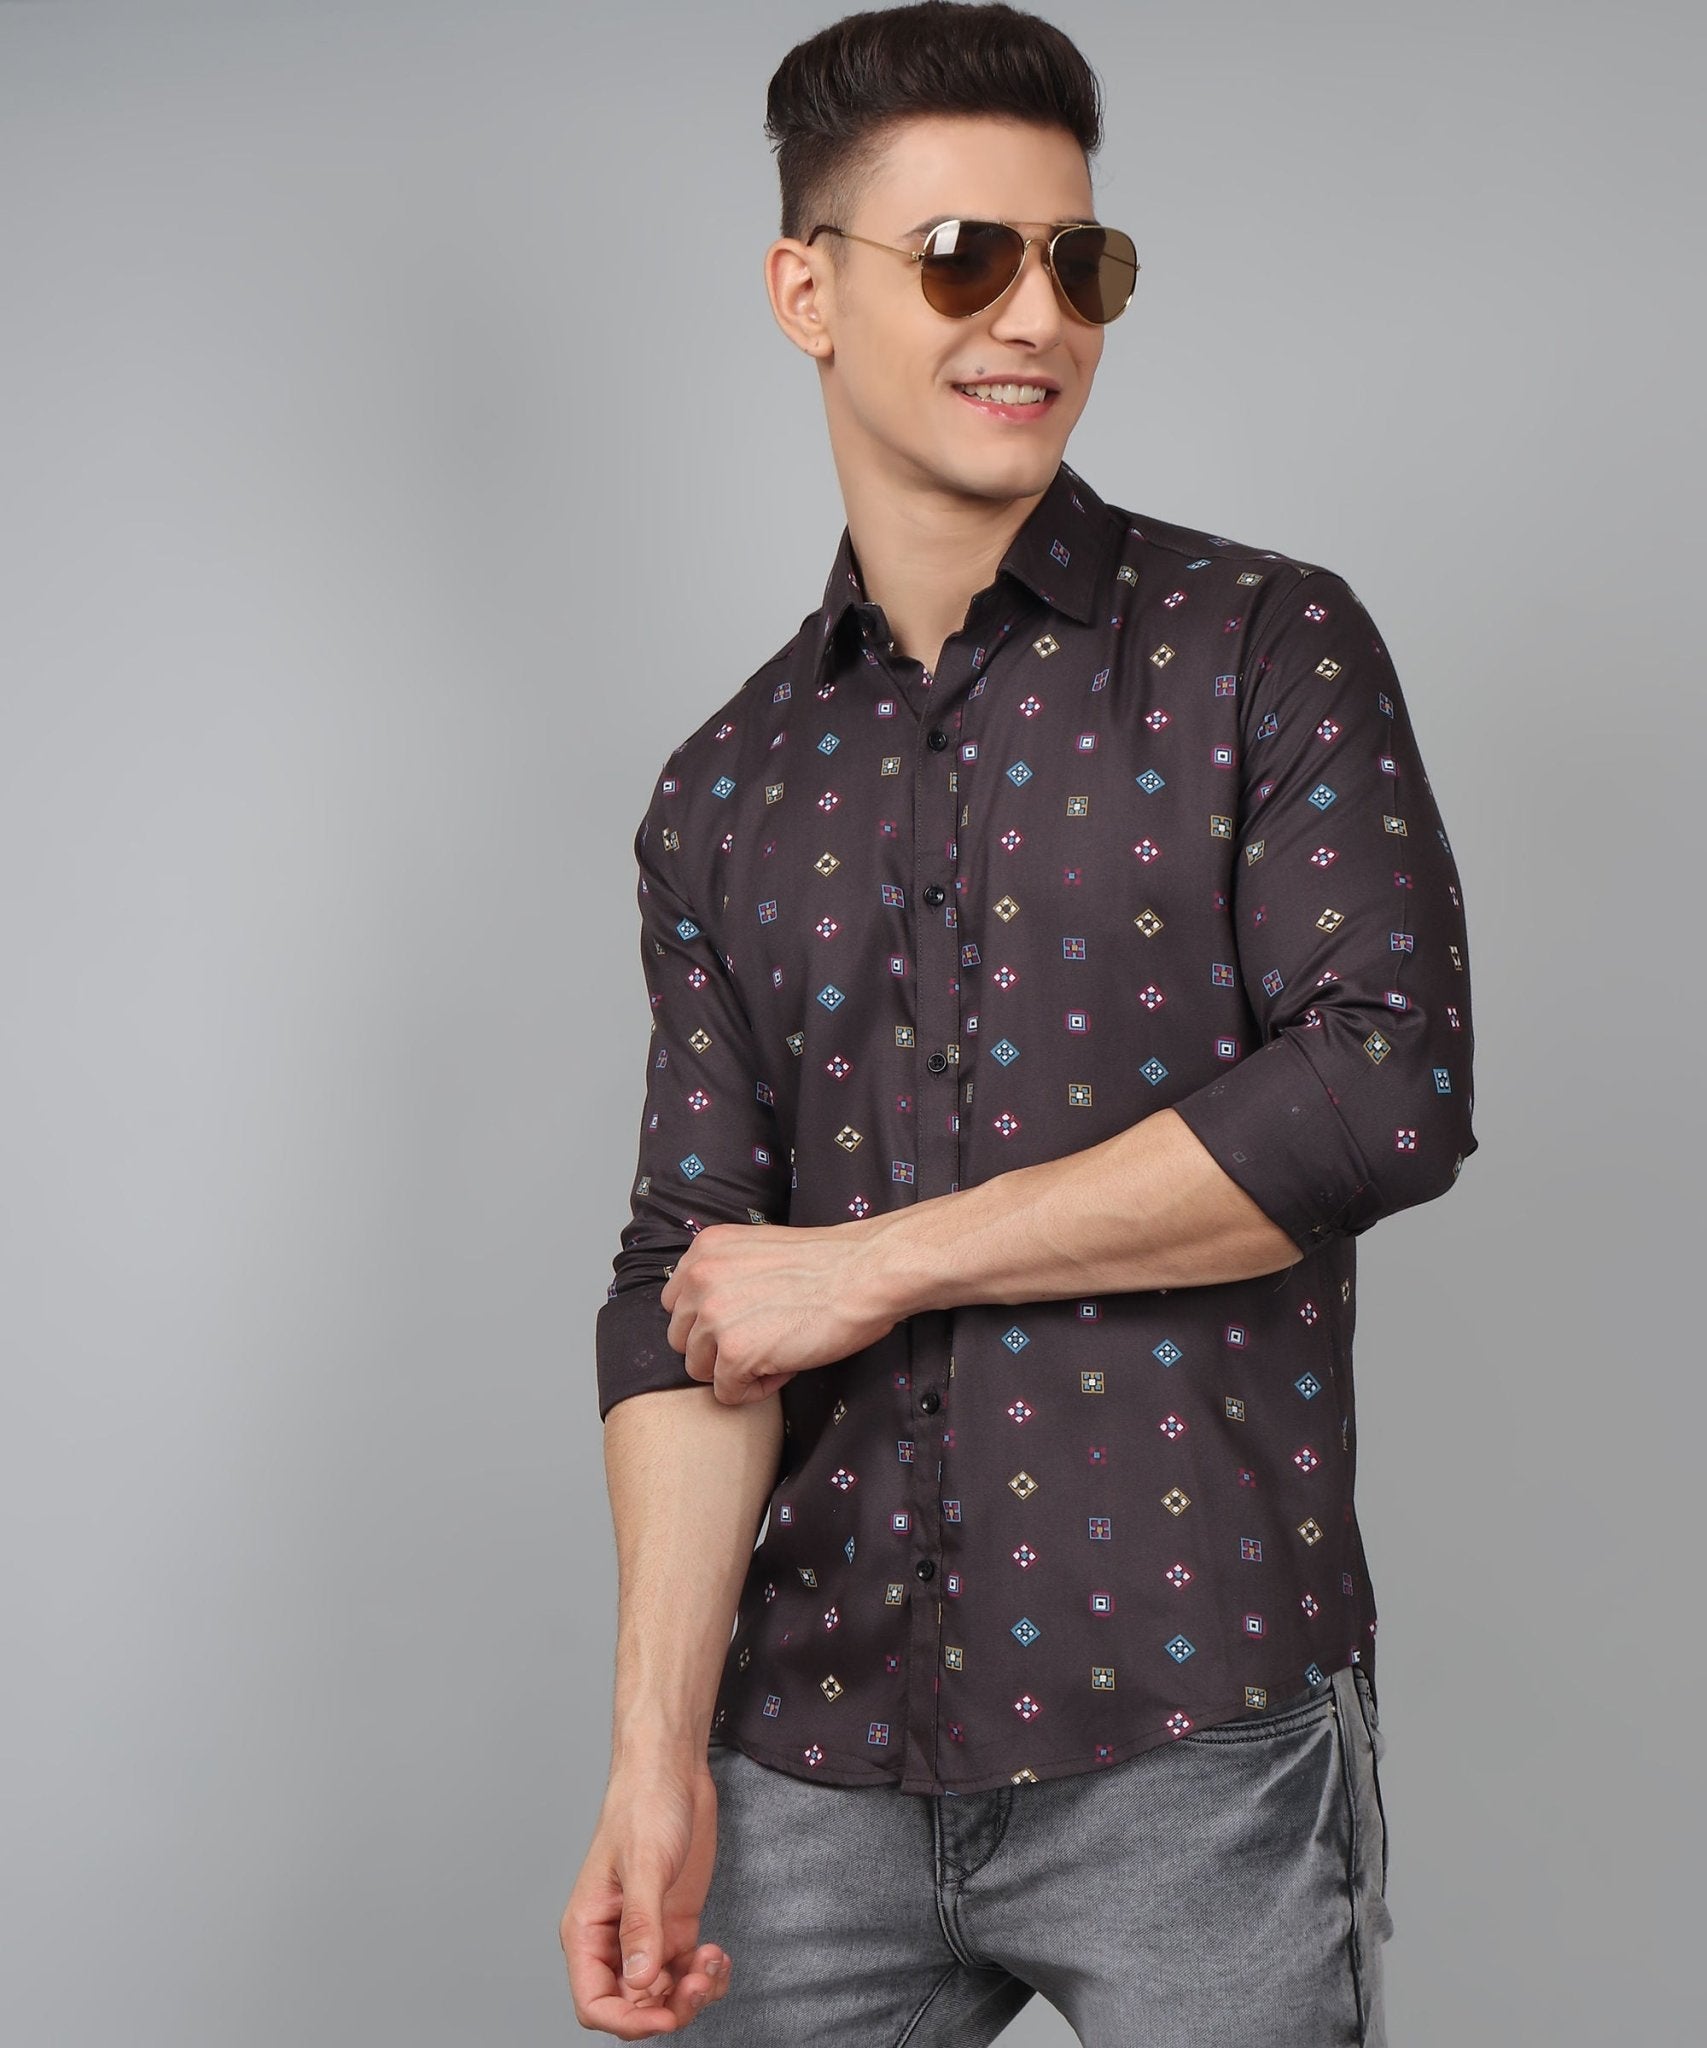 Fabulous Multi Colored Printed Cotton Casual Shirt for Men by Trybuy Premium - TryBuy® USA🇺🇸